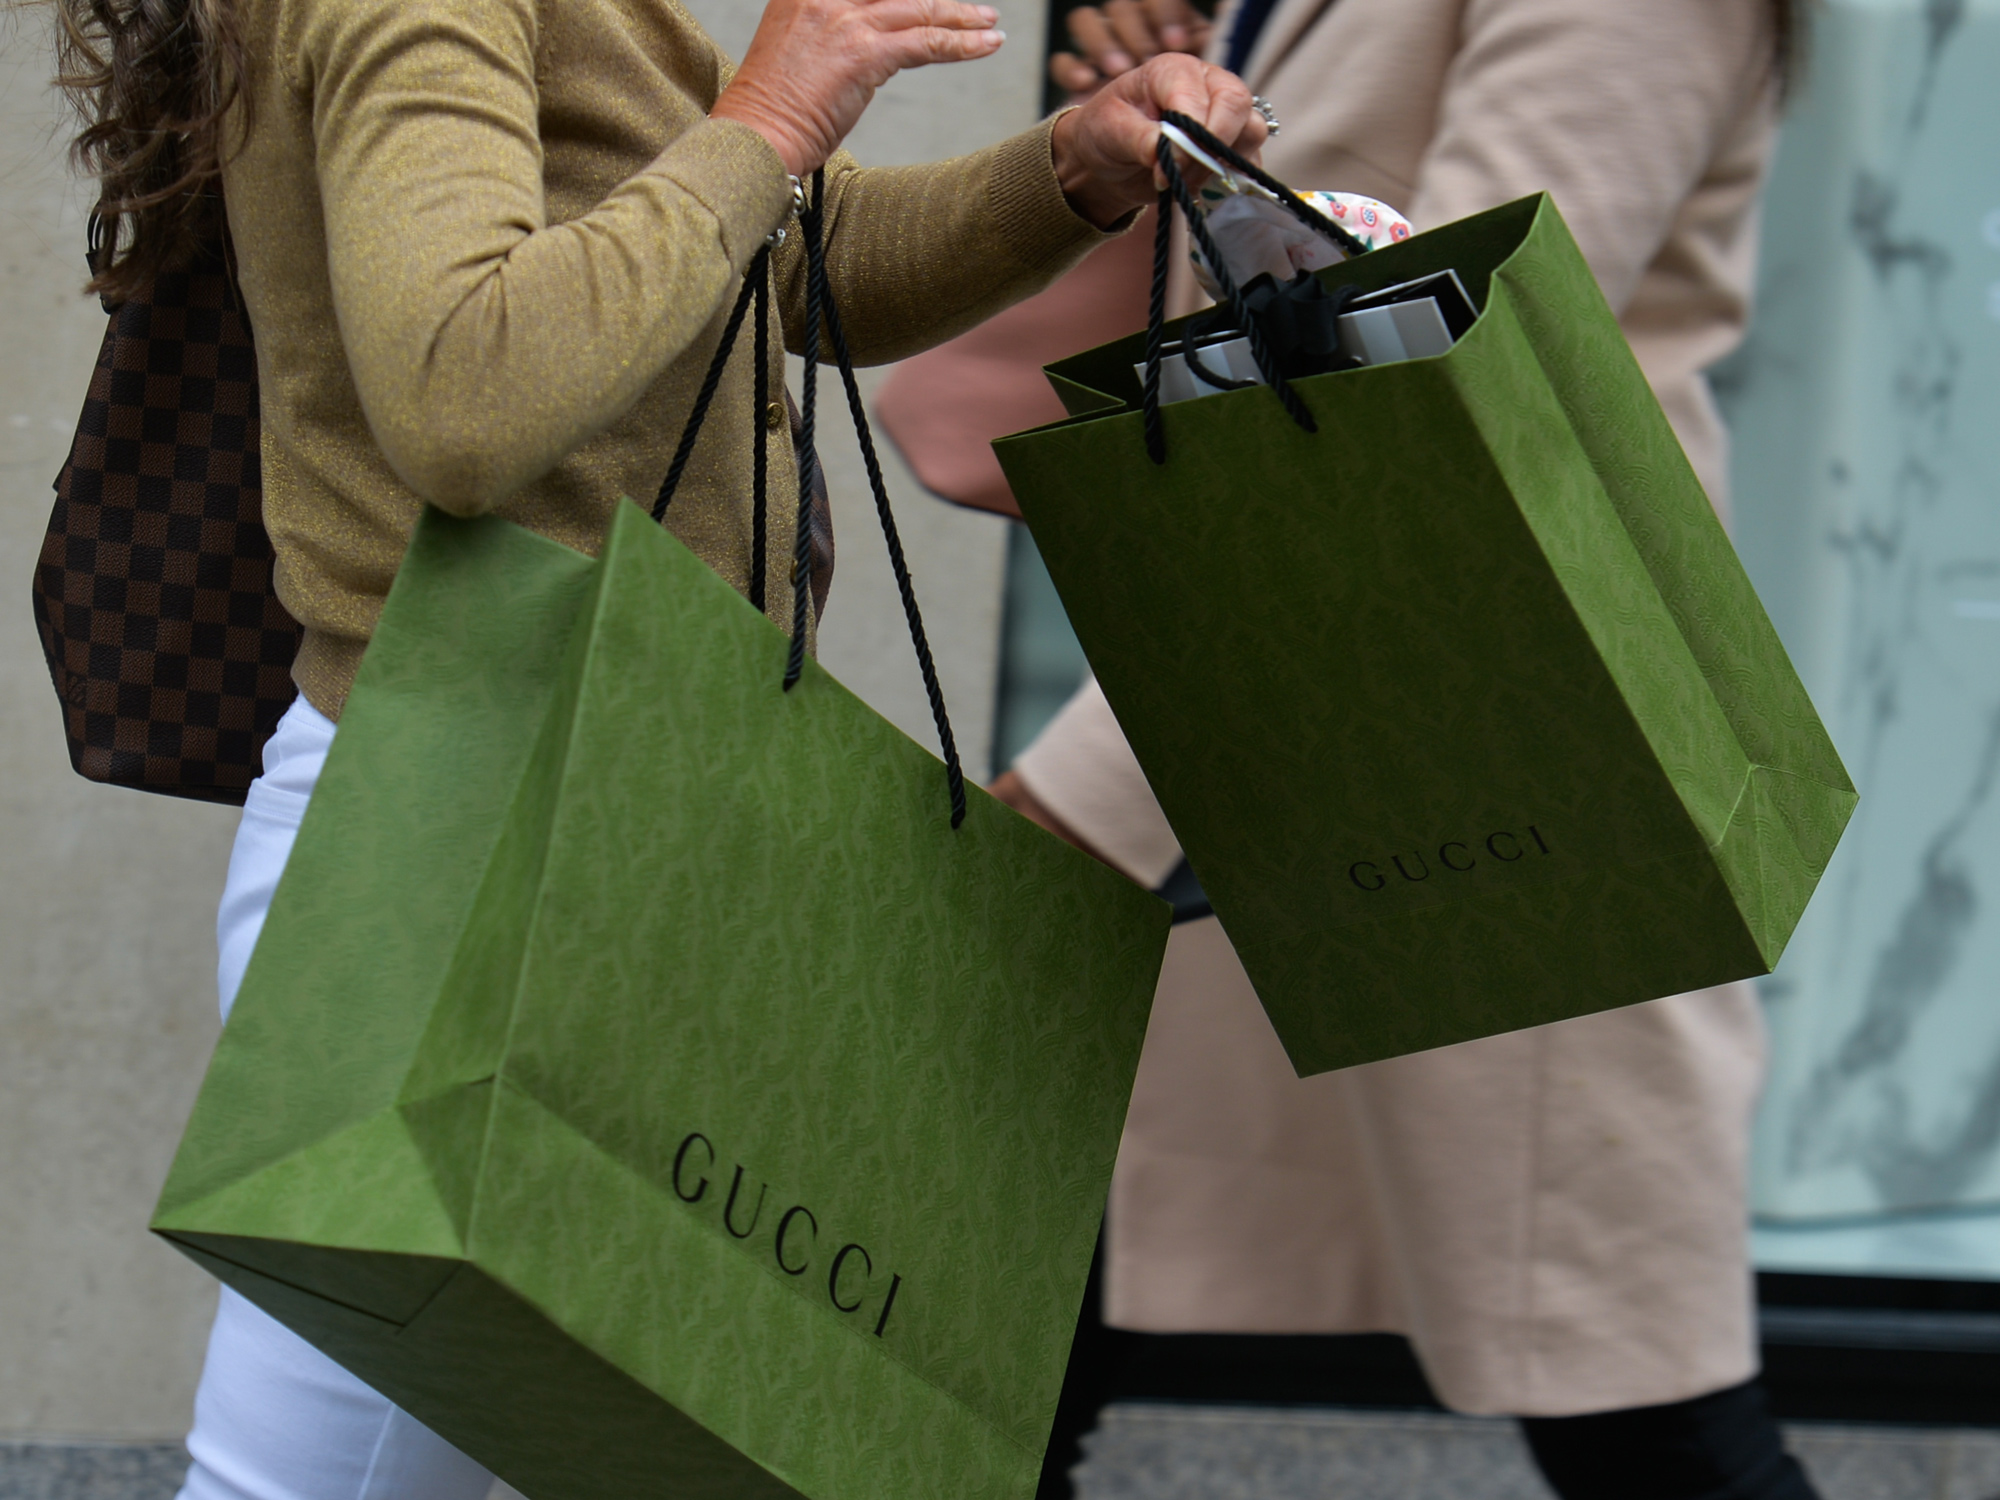 Gucci Owner Rouses Europe Company Debt Sales From Deep Freeze - Bloomberg